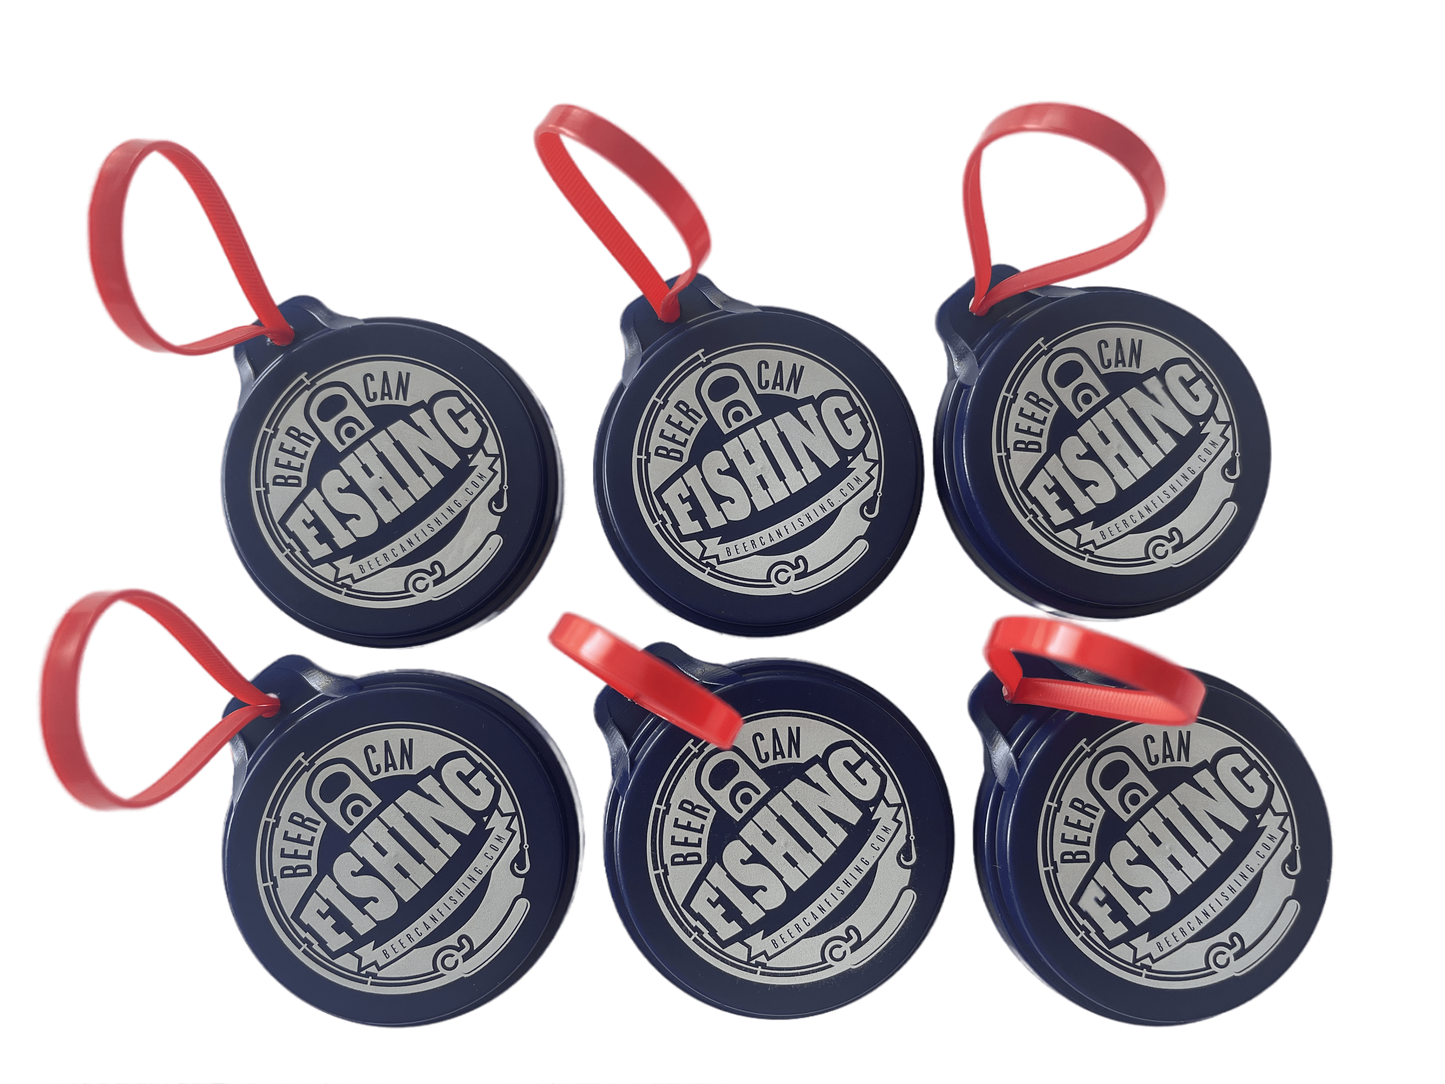 6 pack of beer can fishing game lids